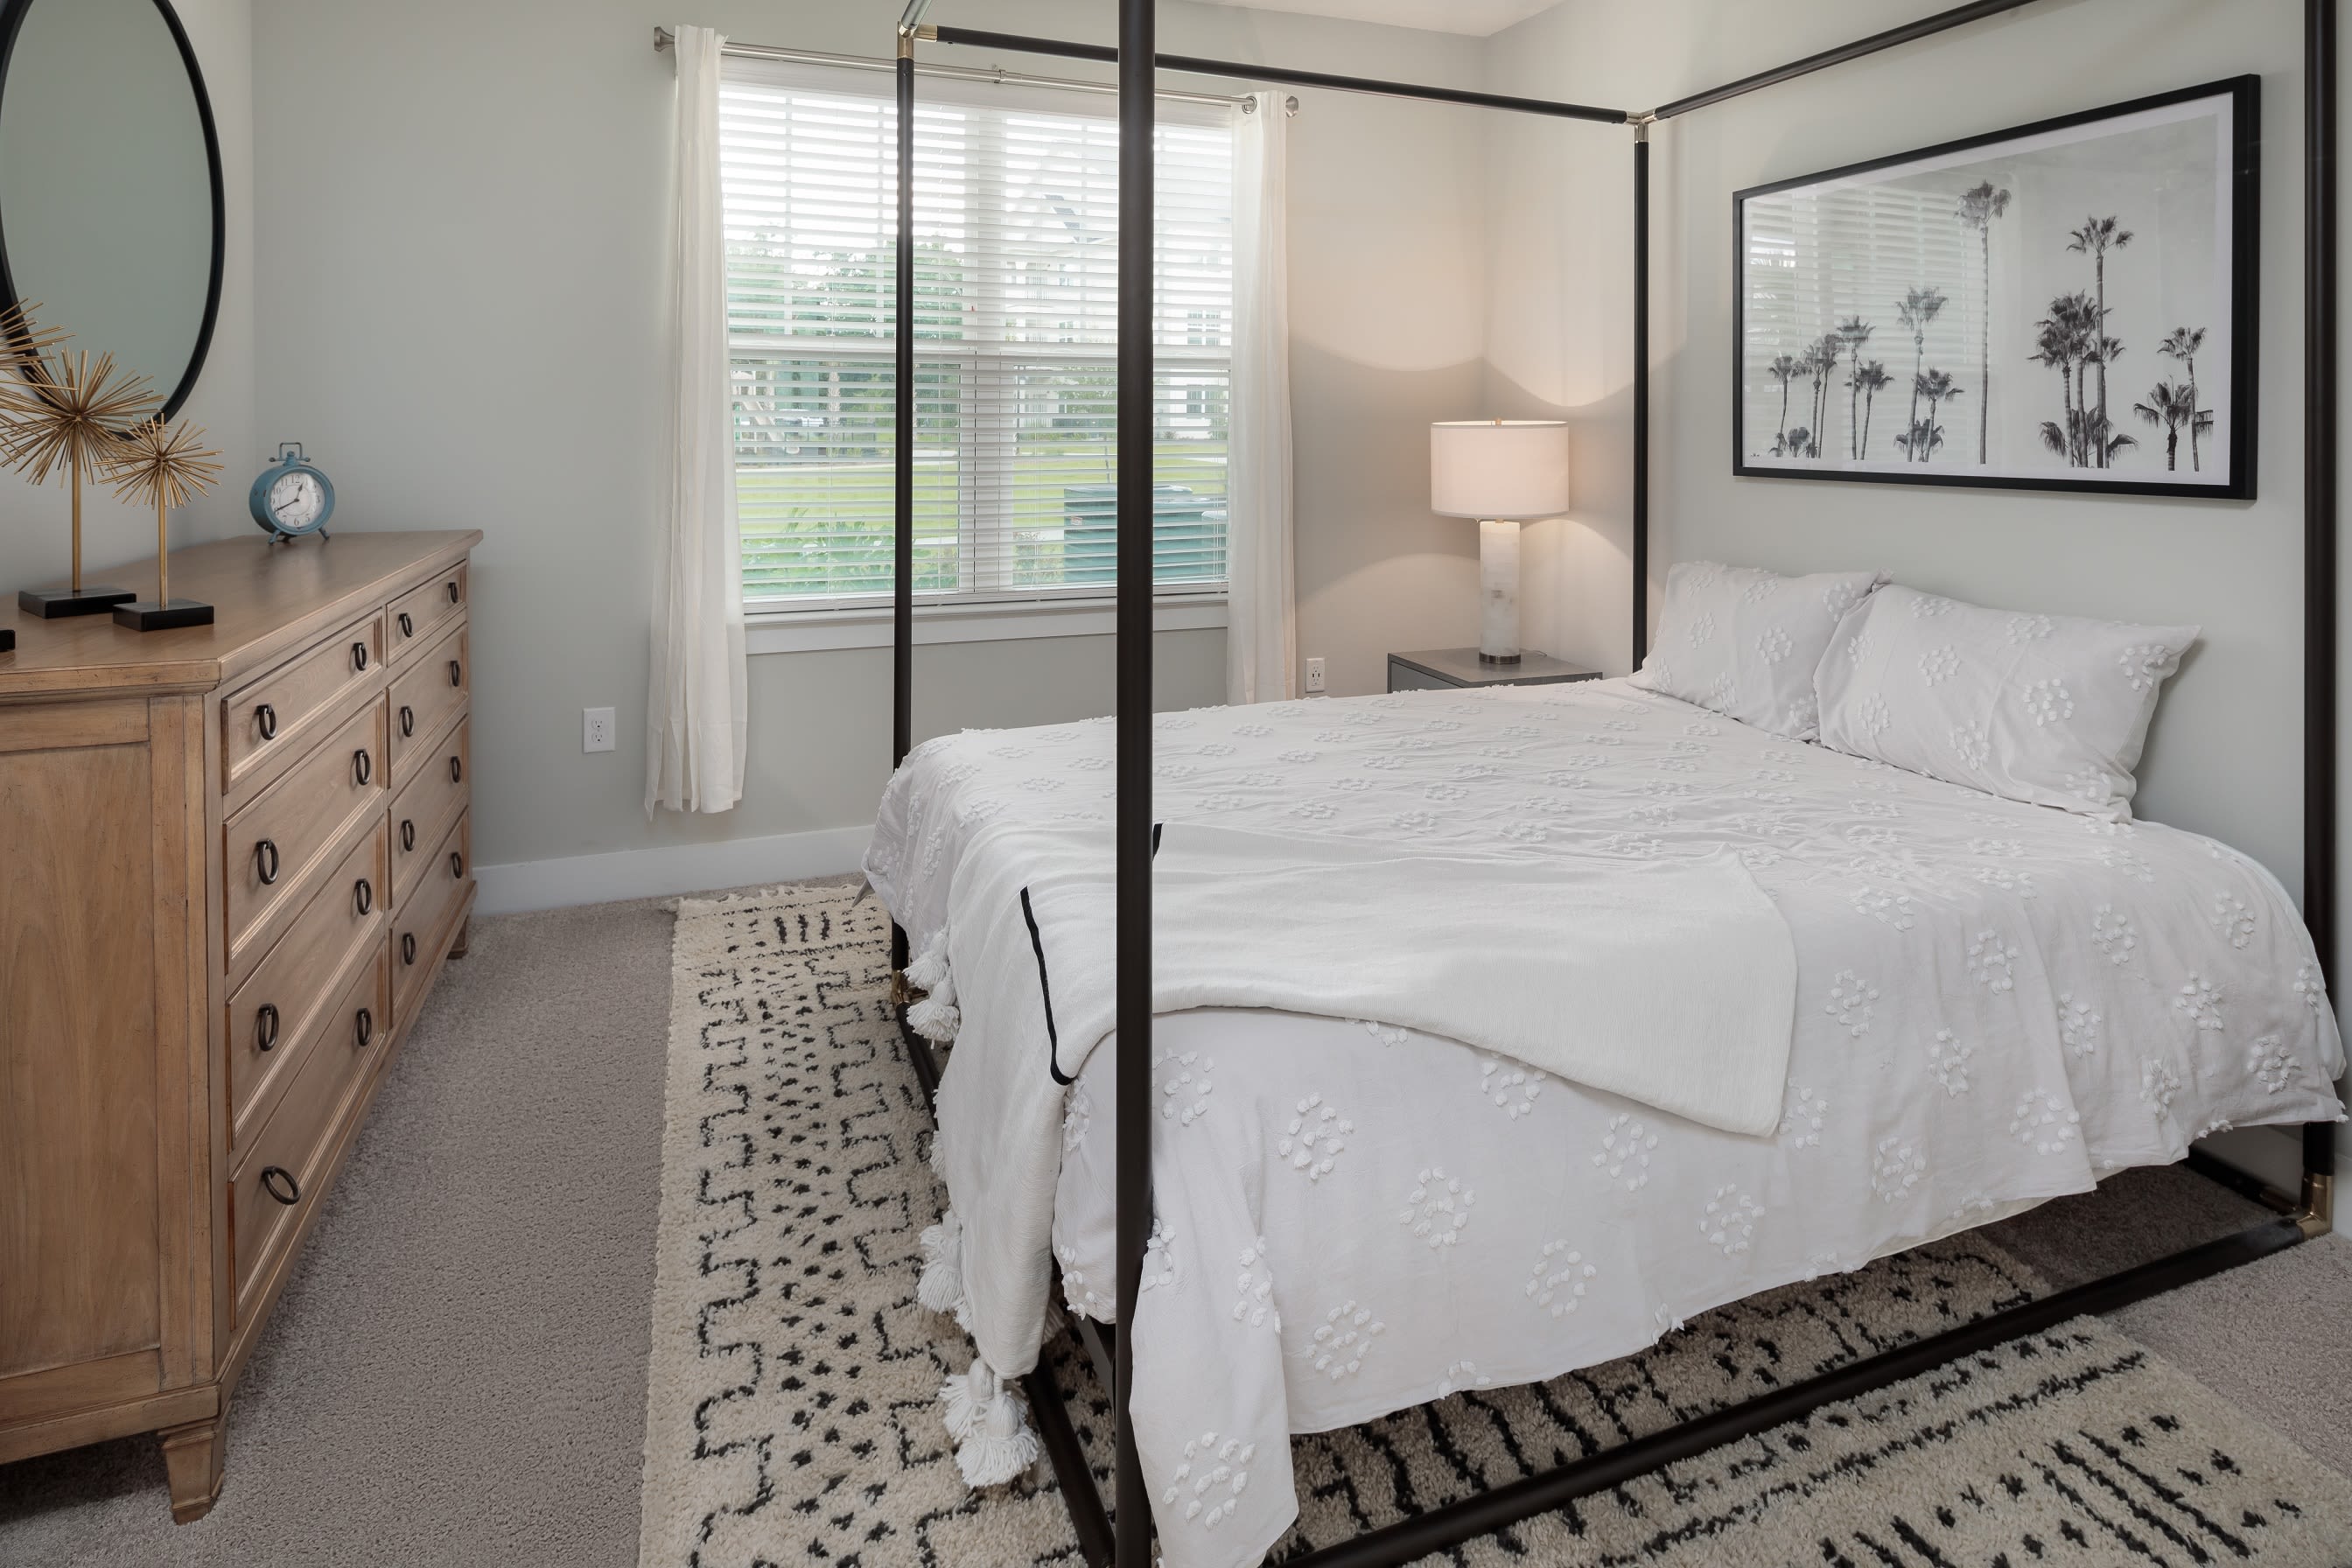 A furnished model bedroom at The Mason in Ladson, South Carolina